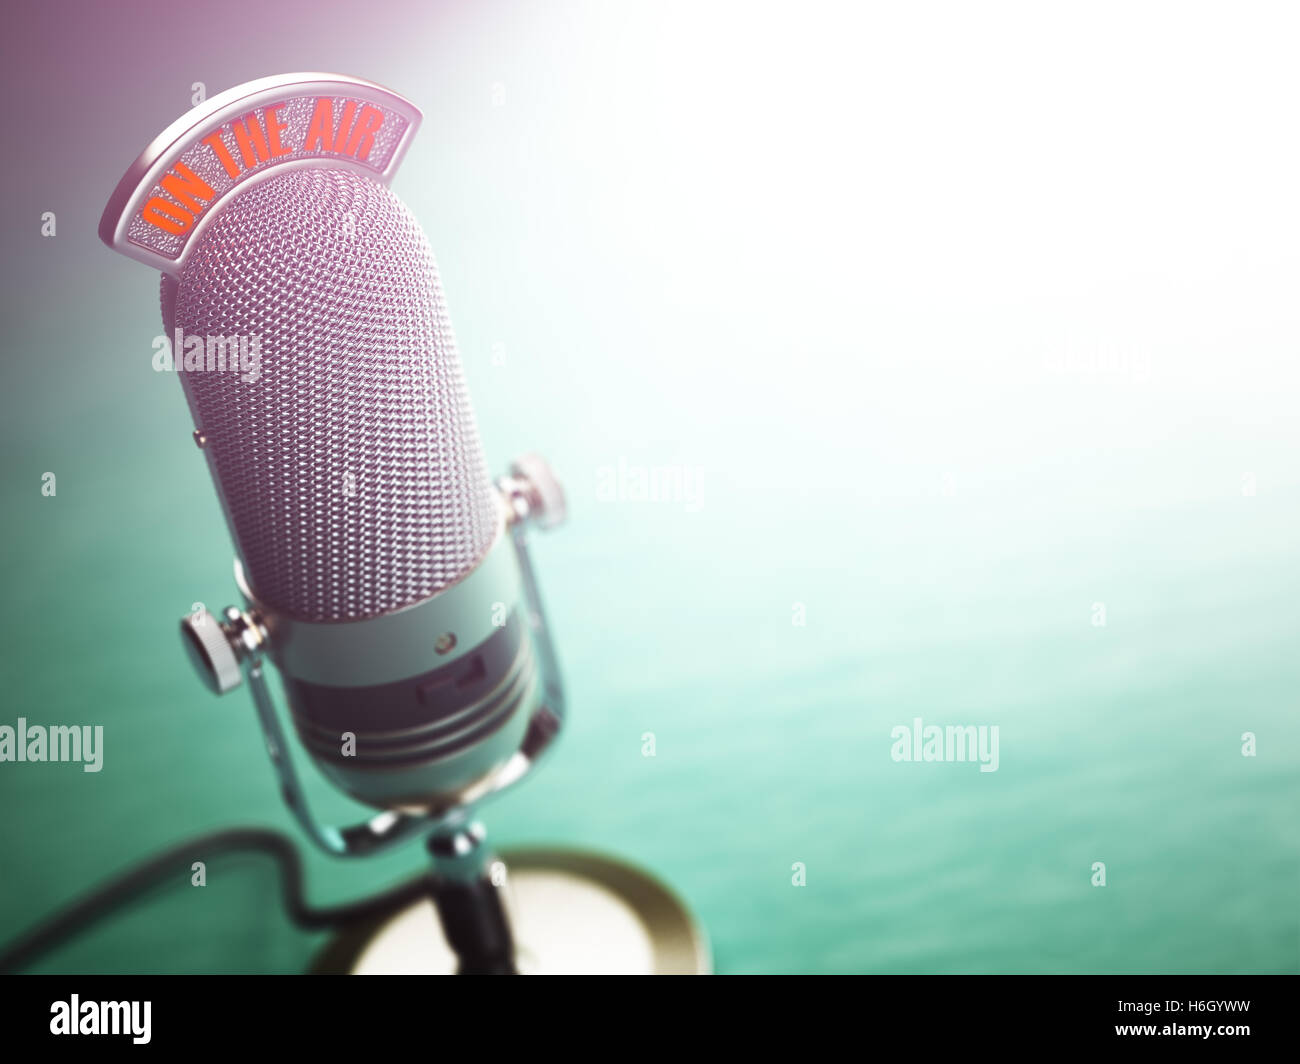 Retro old microphone with text on the air. Radio show or audio podcast concept. Vintage microphone. 3d illustration Stock Photo